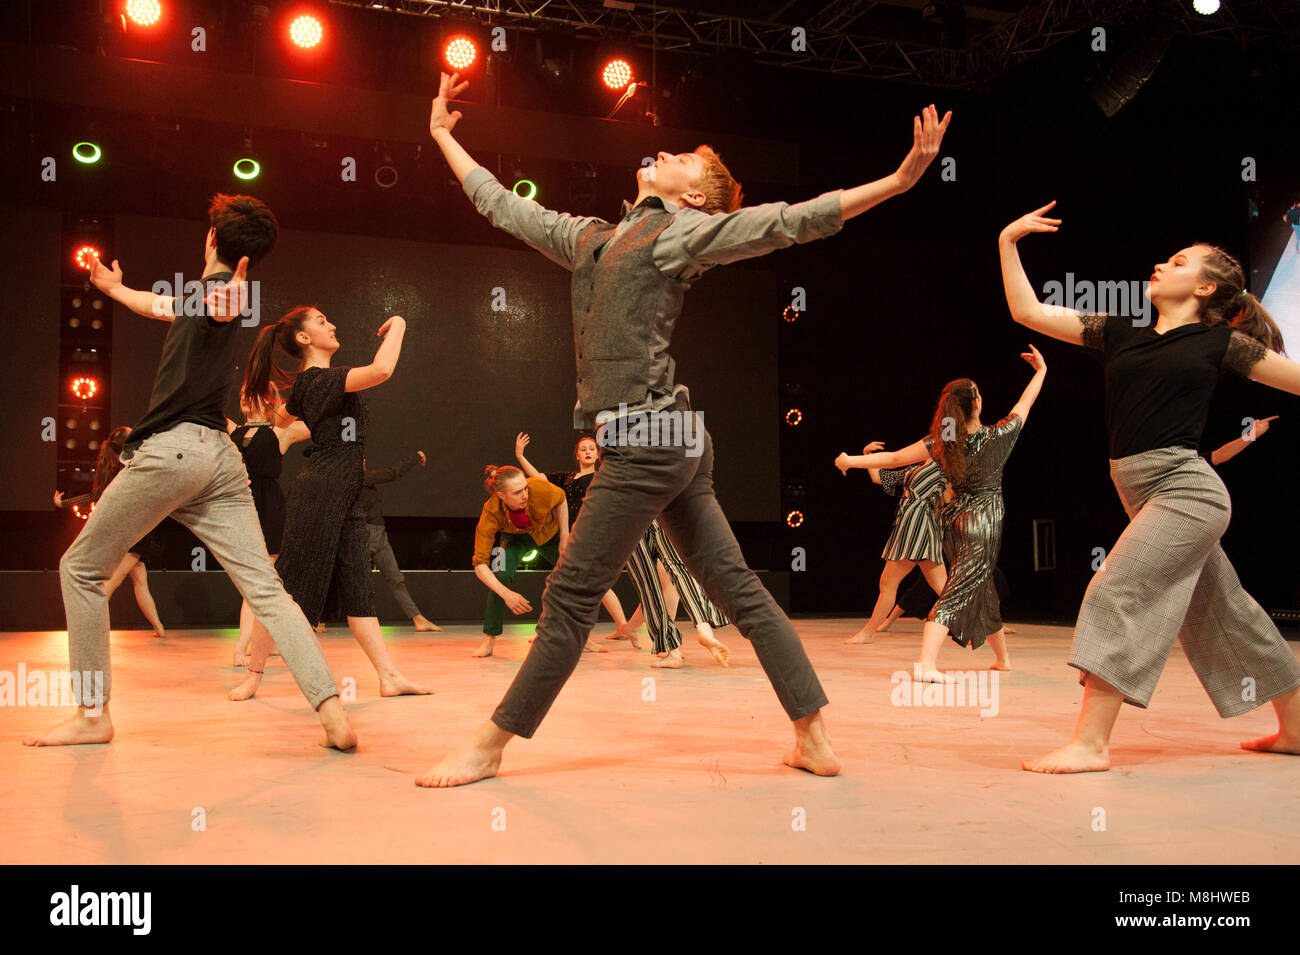 Move It 2018. Dancers from ENBYouthCo perform on the main stage. Move It, the country's biggest dance event, takes place at ExCeL, London, UK. Running 16th-18th March 2018, the event is drawing large crowds of dance enthusiasts and students, with trade stands, workshops, showcases, and stunning performances by leading performing arts academies and dance groups taking place on the main stage throughout each day. 17th March 2018. Credit: Antony Nettle/Alamy Live News Stock Photo